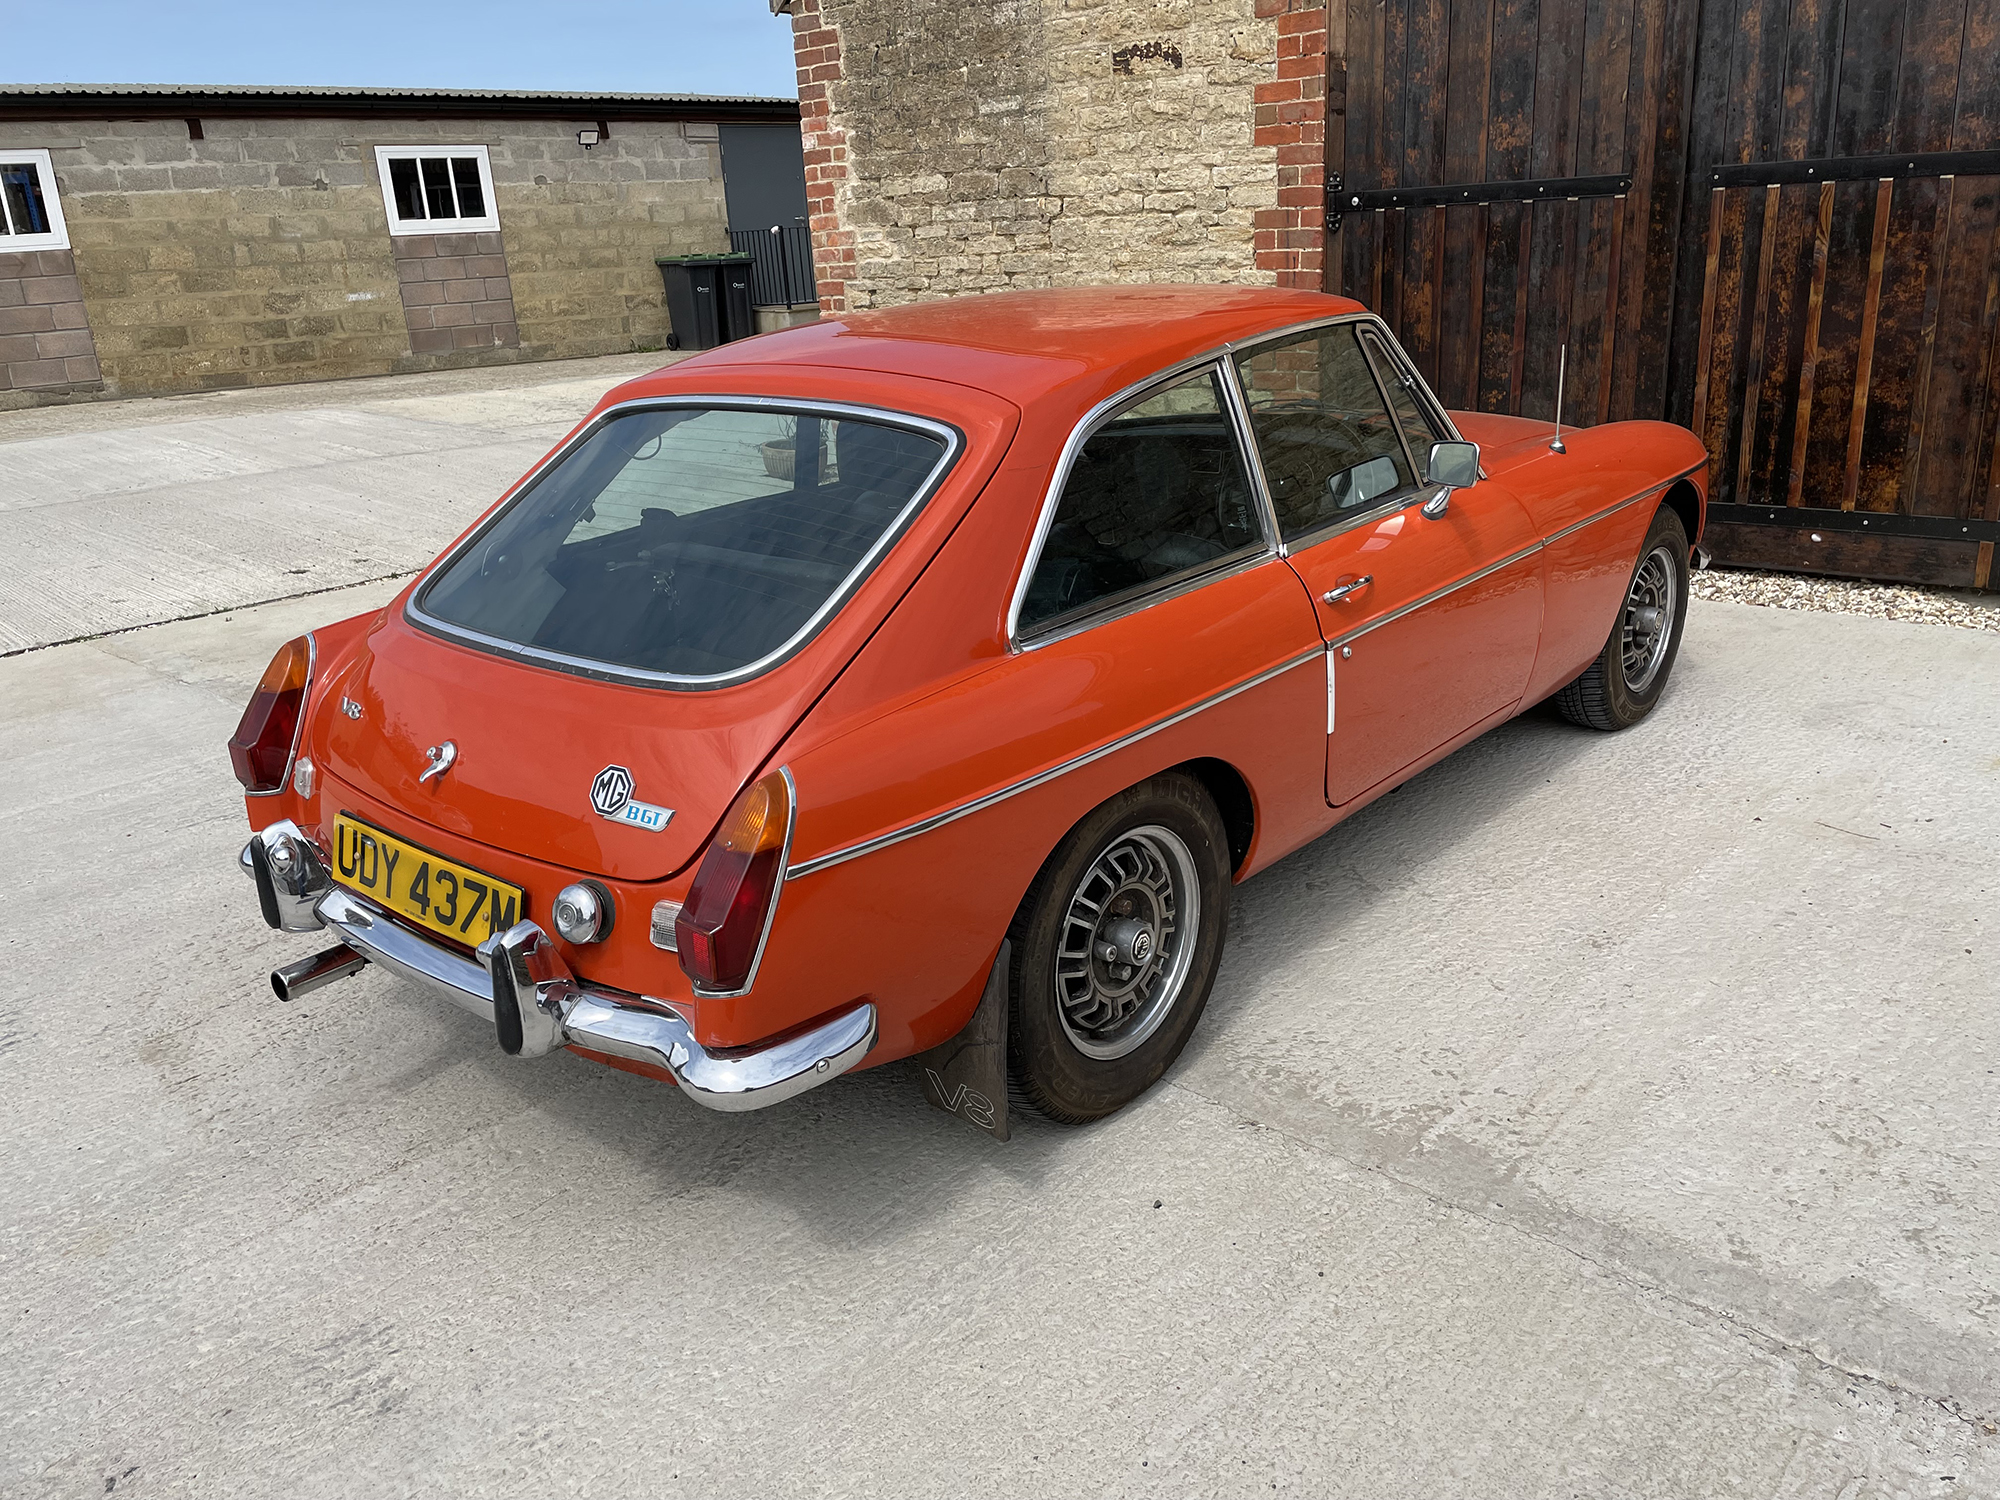 1973 MGB GT V8 Reg. no. UDY 437M Chassis no. GD2D1125G Engine no. 8600023 - Image 8 of 16